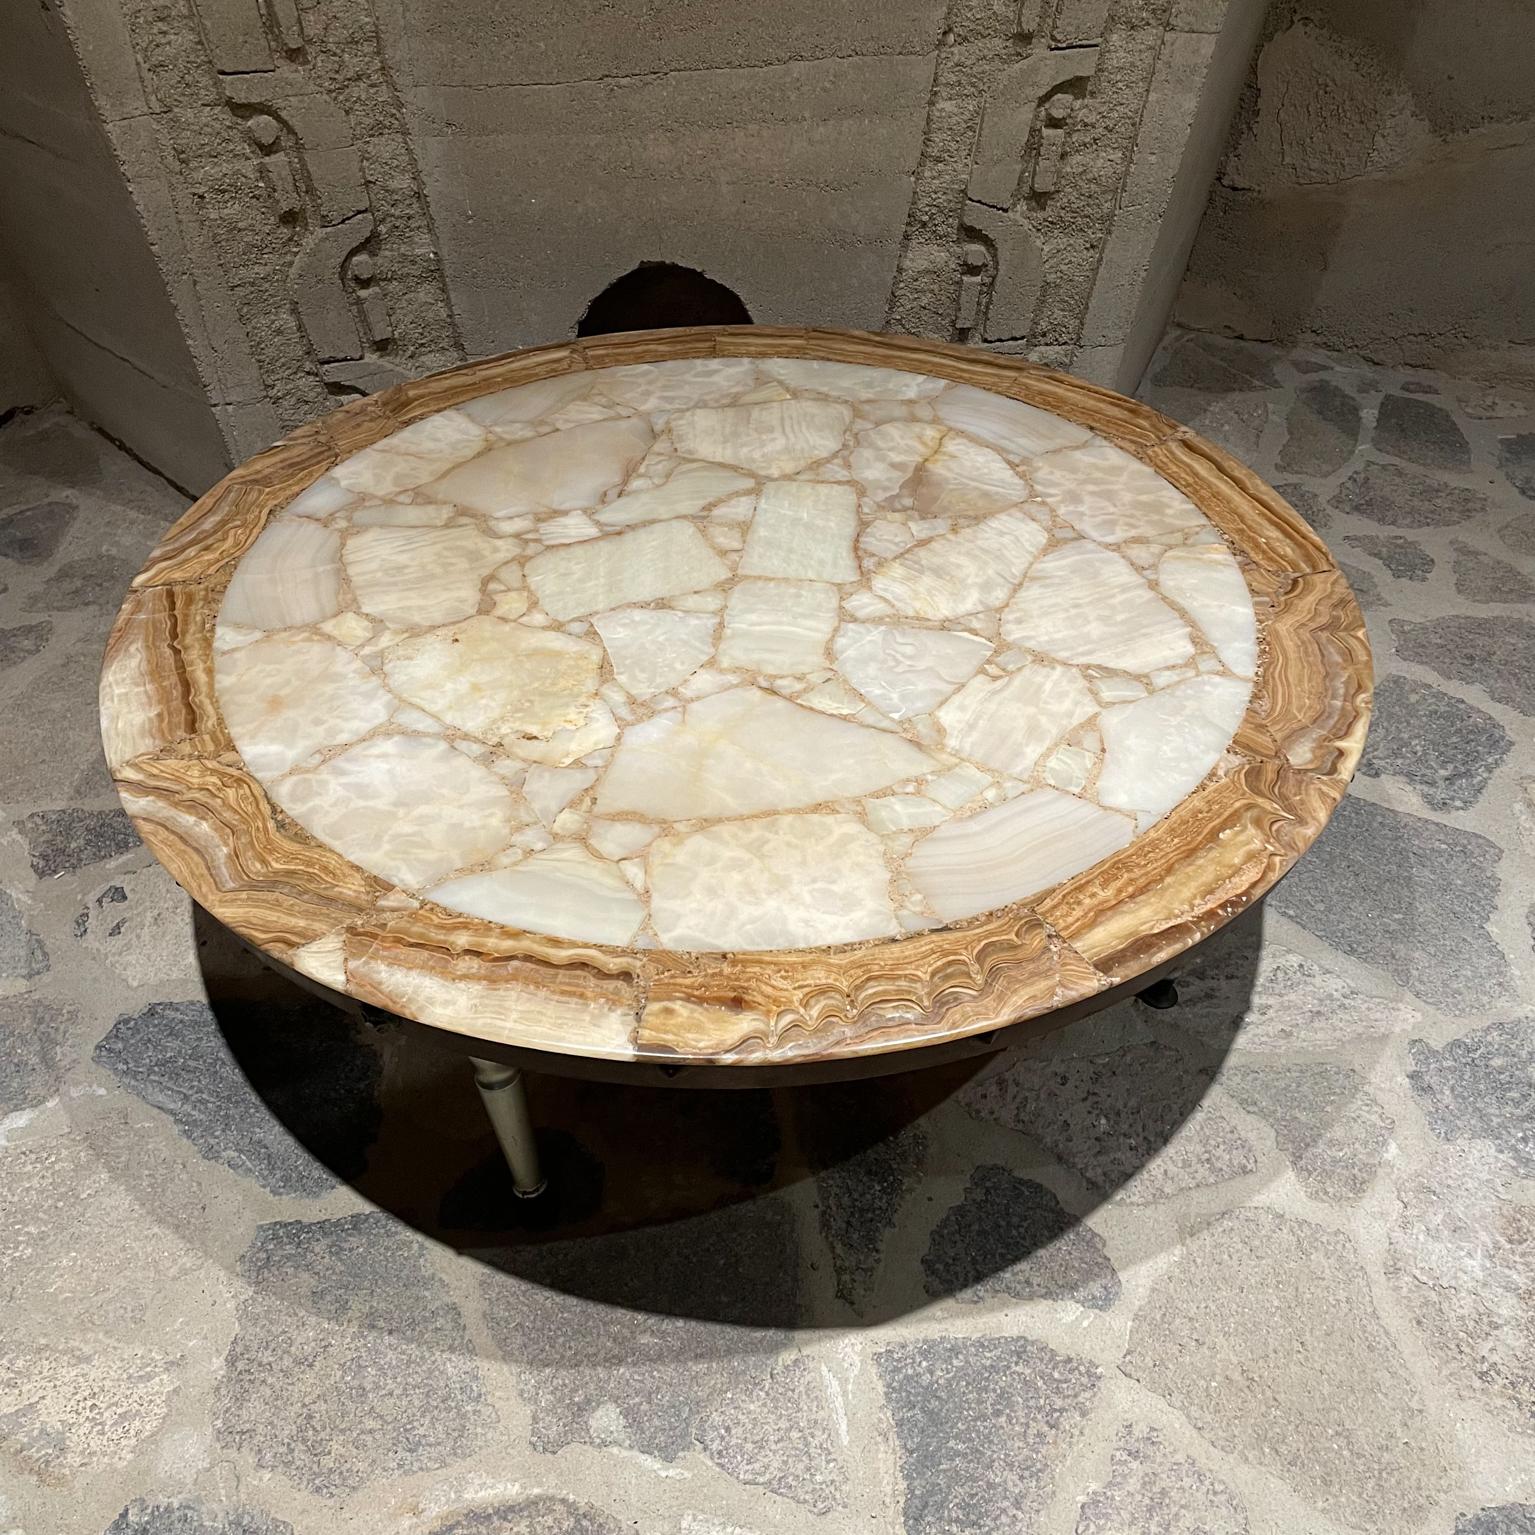 1960s Glamorous Modern Round Coffee Table in Onyx Stone by Muller of Mexico  2